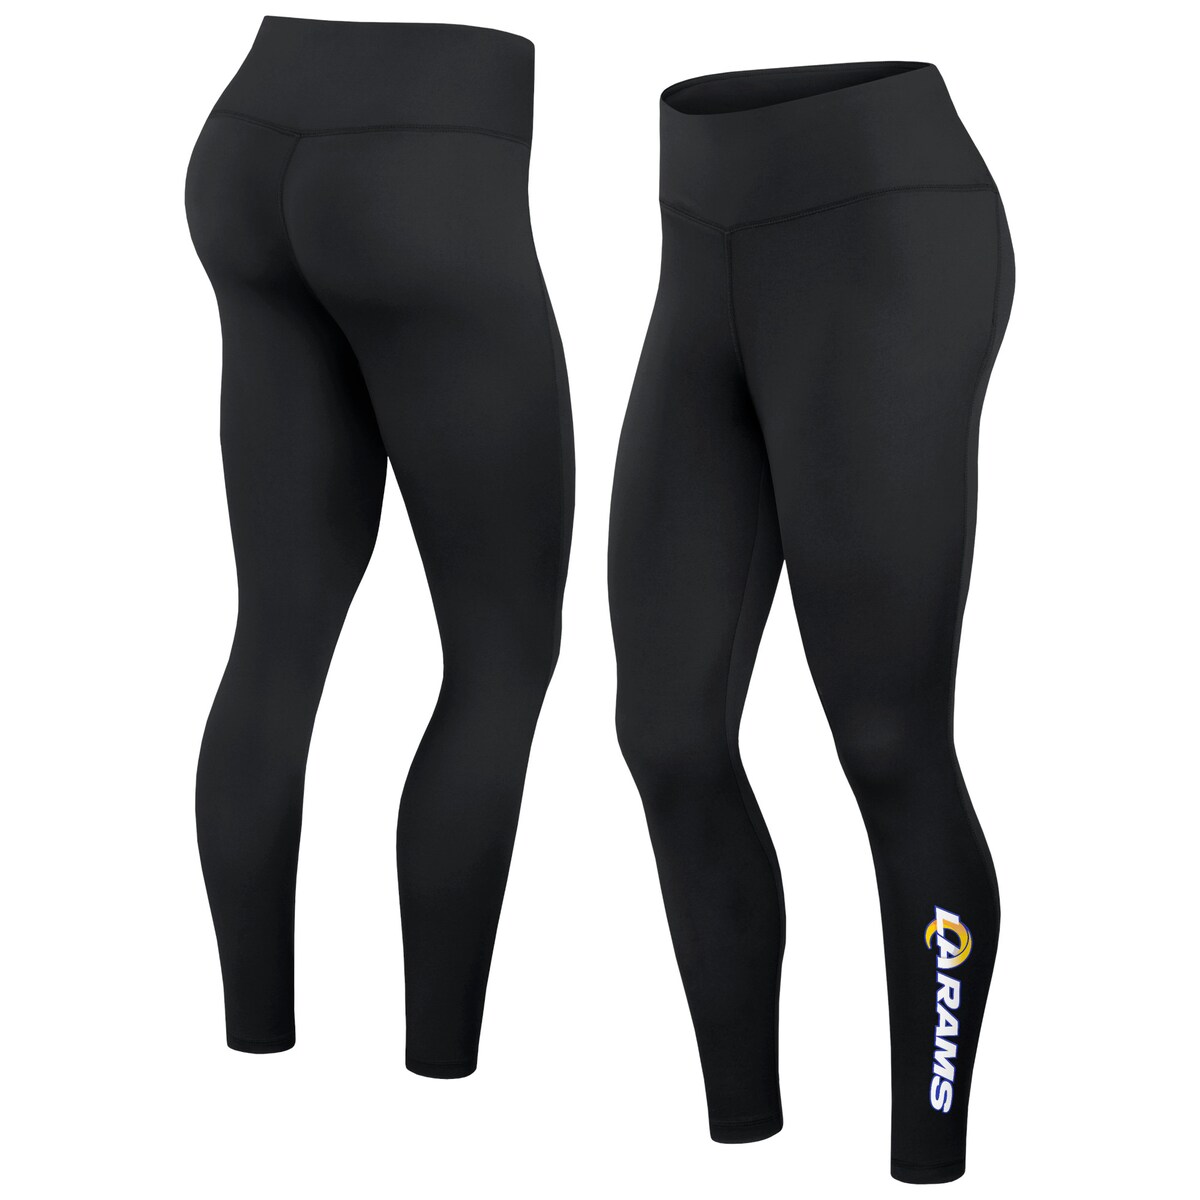 Flaunt your team spirit in a charming fashion with these fresh Los Angeles Rams Stacked leggings by Fanatics Branded. An elastic waistband and comfortable stretchy fabric make these bottoms perfect for a workout or a relaxed game day outfit. Subtle yet striking Los Angeles Rams graphics down the leg add flair.Inseam on size S measures approx. 26.5"Screen print graphicsFlatlock stitchingMachine wash, tumble dry lowImportedOfficially licensedMaterial: 95% Polyester/5% SpandexBrand: Fanatics BrandedElastic waistband